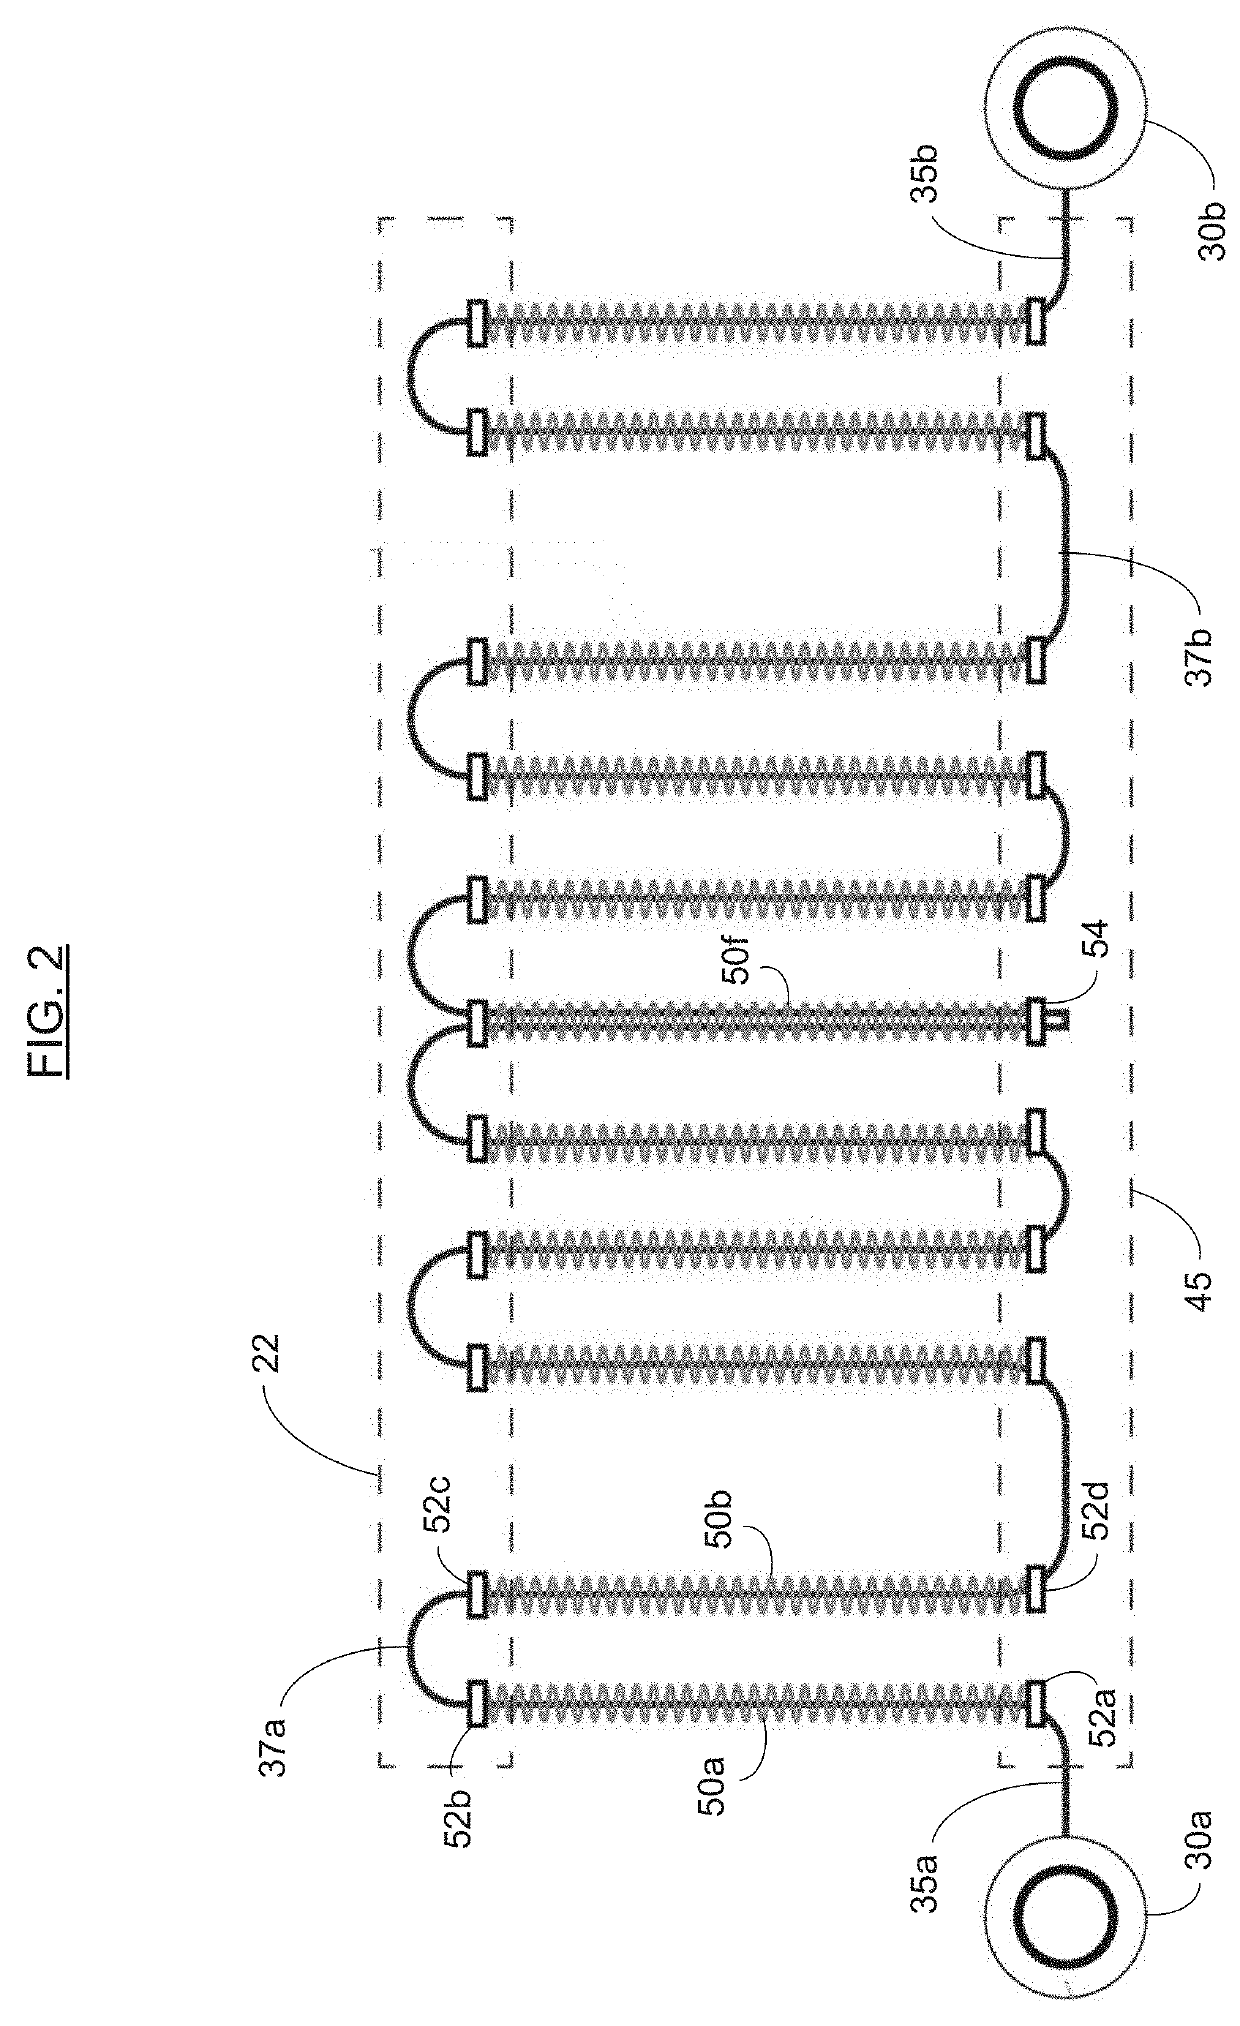 Braces for Alleviating Compression and Methods of Making and Using the Same